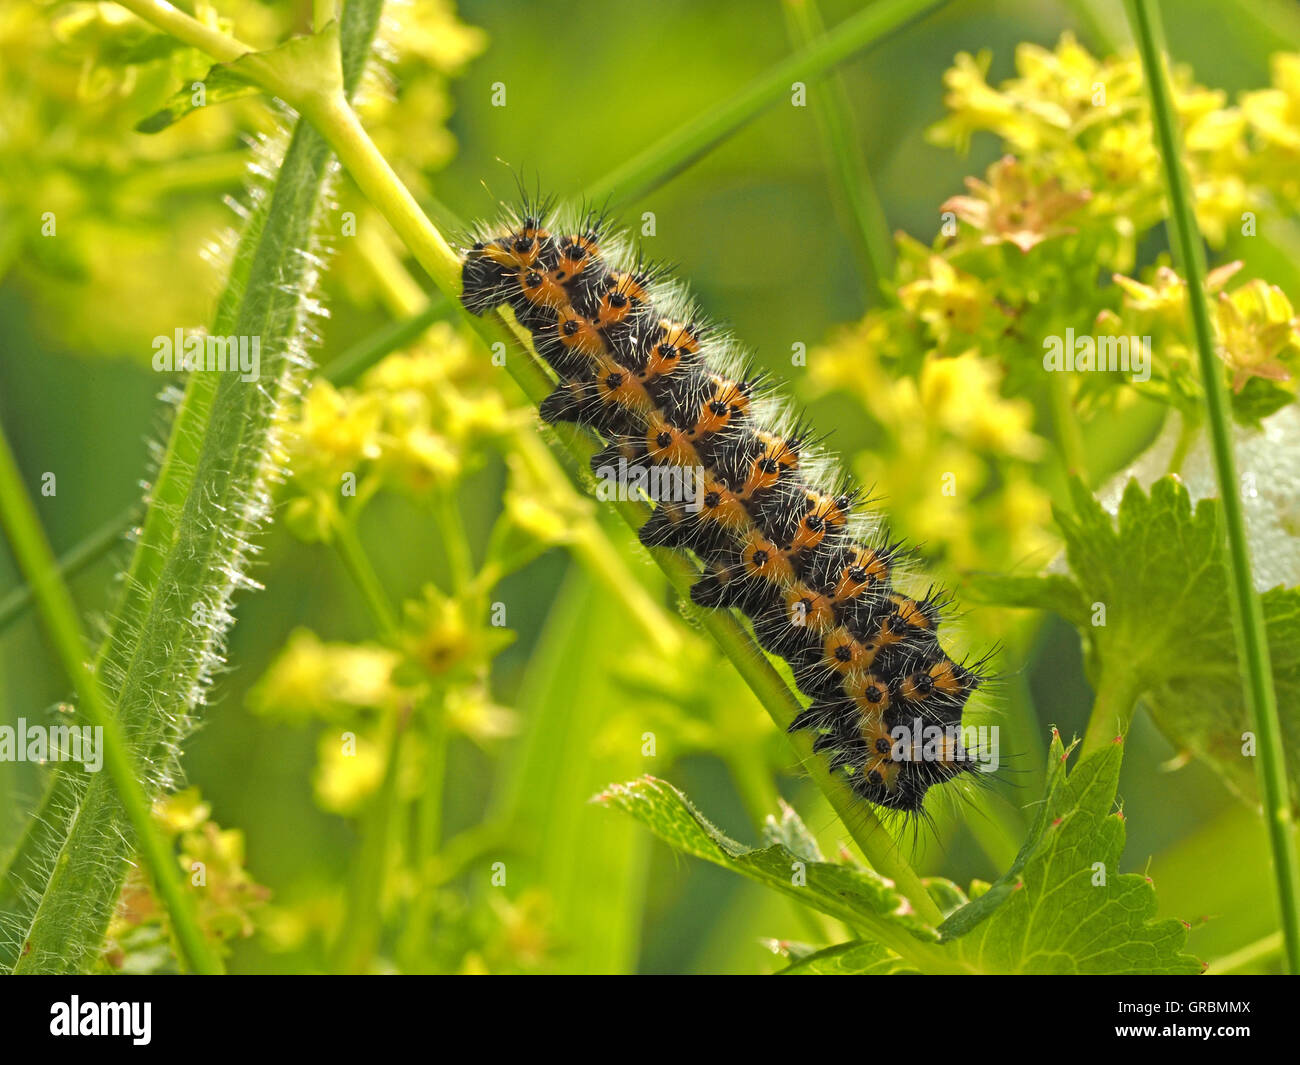 Early instar larva or caterpillar of emperor moth (Saturnia pavonia) feeding on Lady's Bedstraw (Galium verum) with cuckoo spit Stock Photo